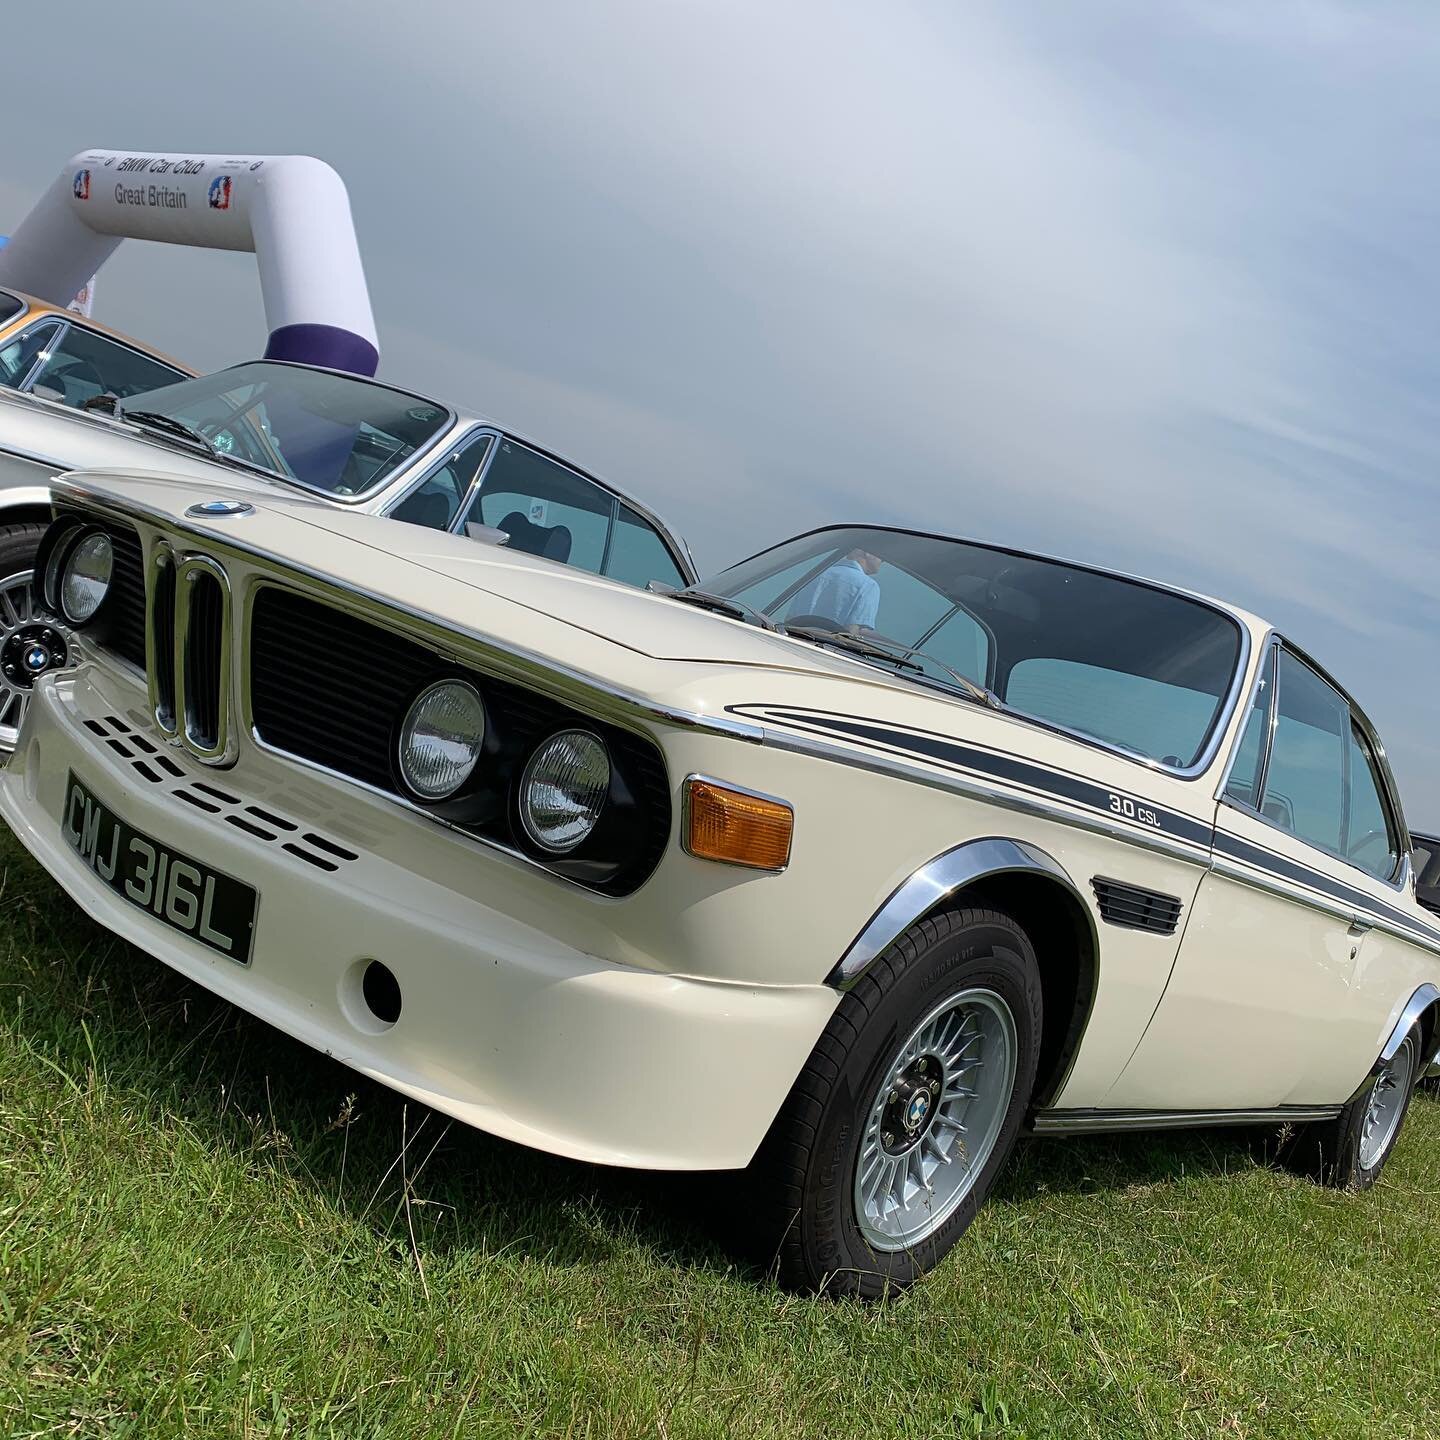 Check out the superb collection of BMW on display at Super Scramble today. #bmwclubuk #hvsuk #classiccarstorage #bmwcsl #classicbmw #bicesterheritage #munichlegends #bmwclassics